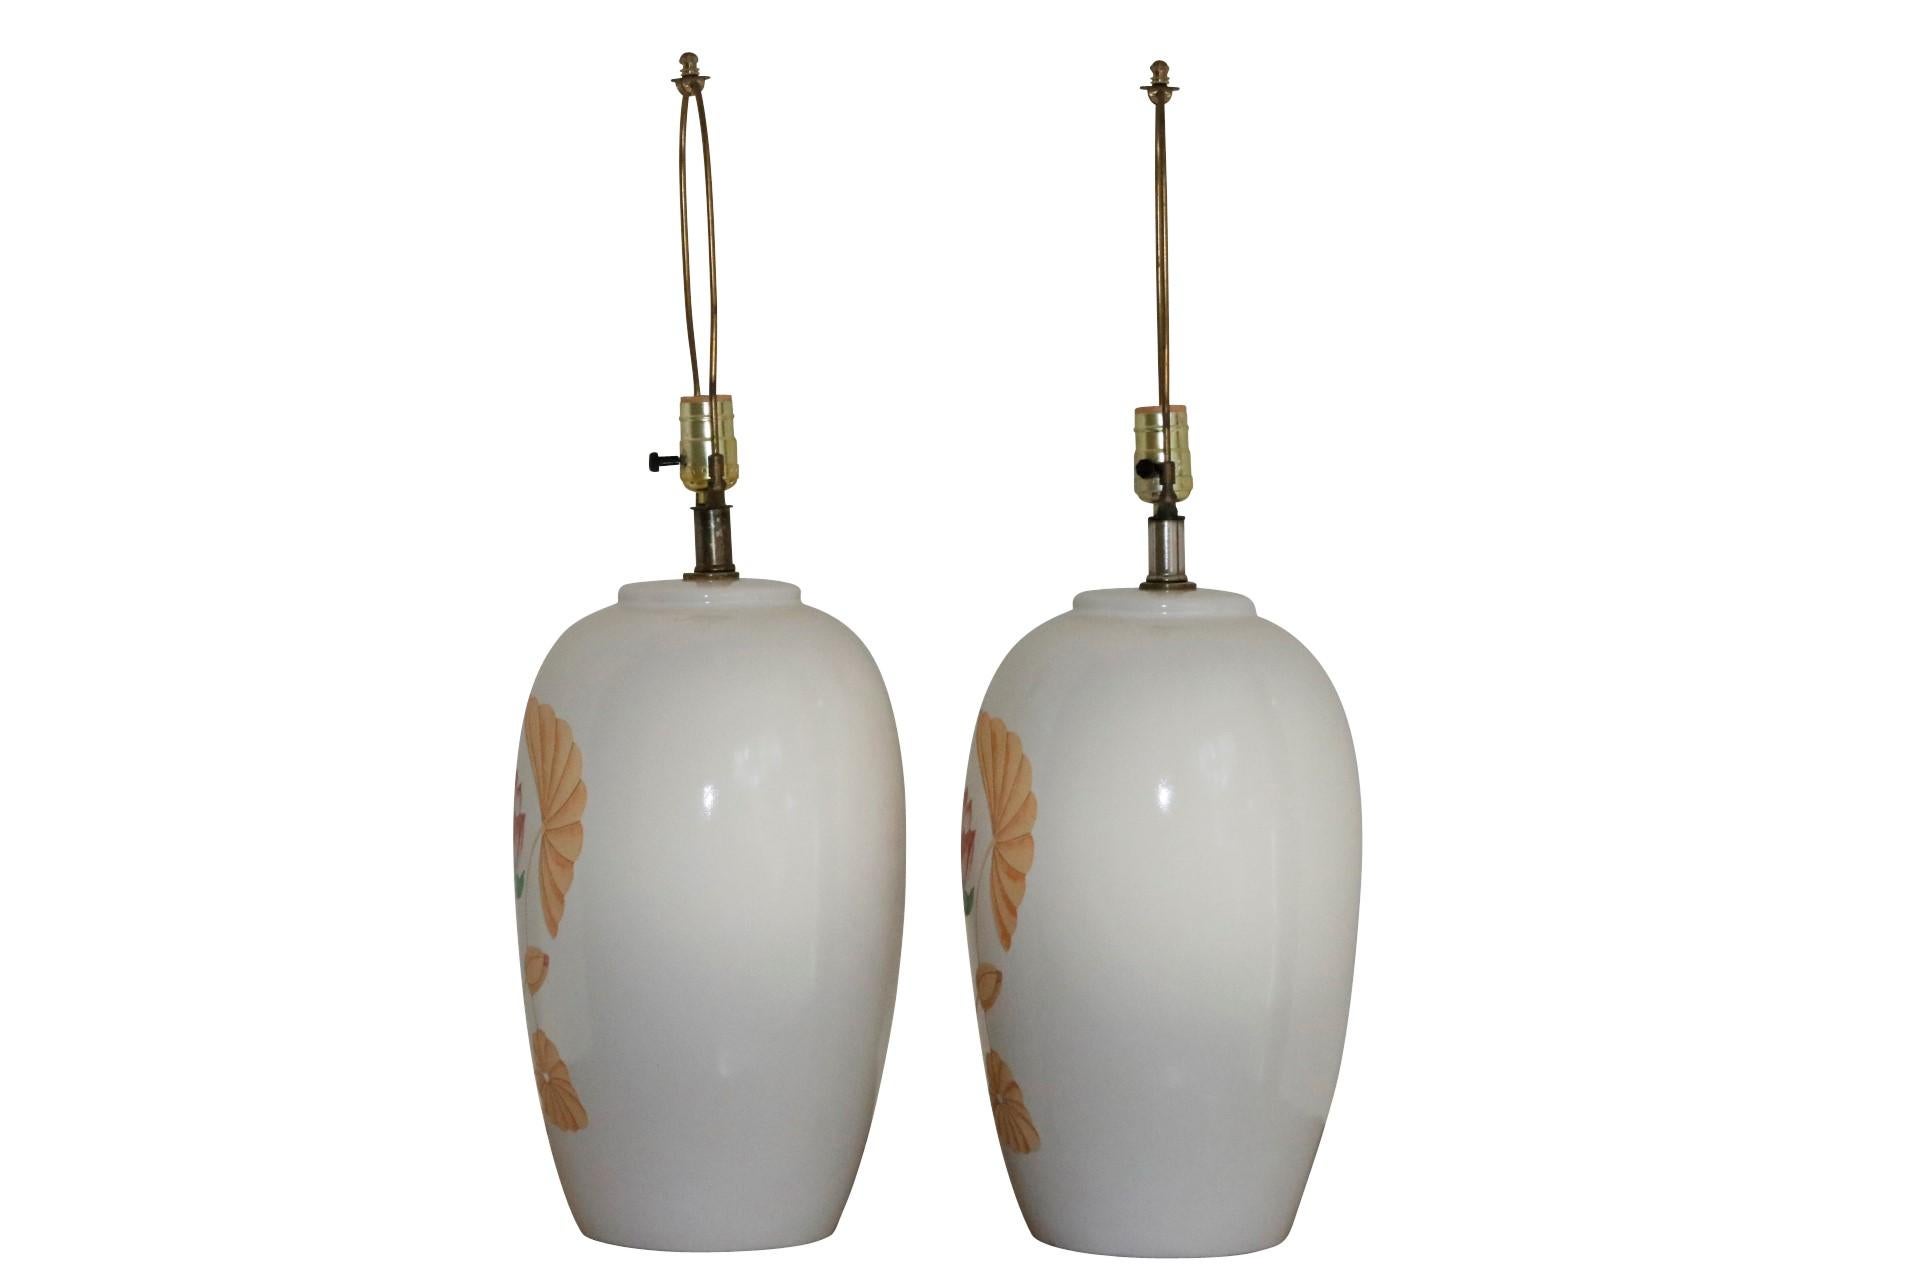 A pair of white ceramic table lamps. Fronts are decorated with a printed water lily motif in pink and green, framed with lilies in yellow. Wired and working. Each lamp measures 19.5